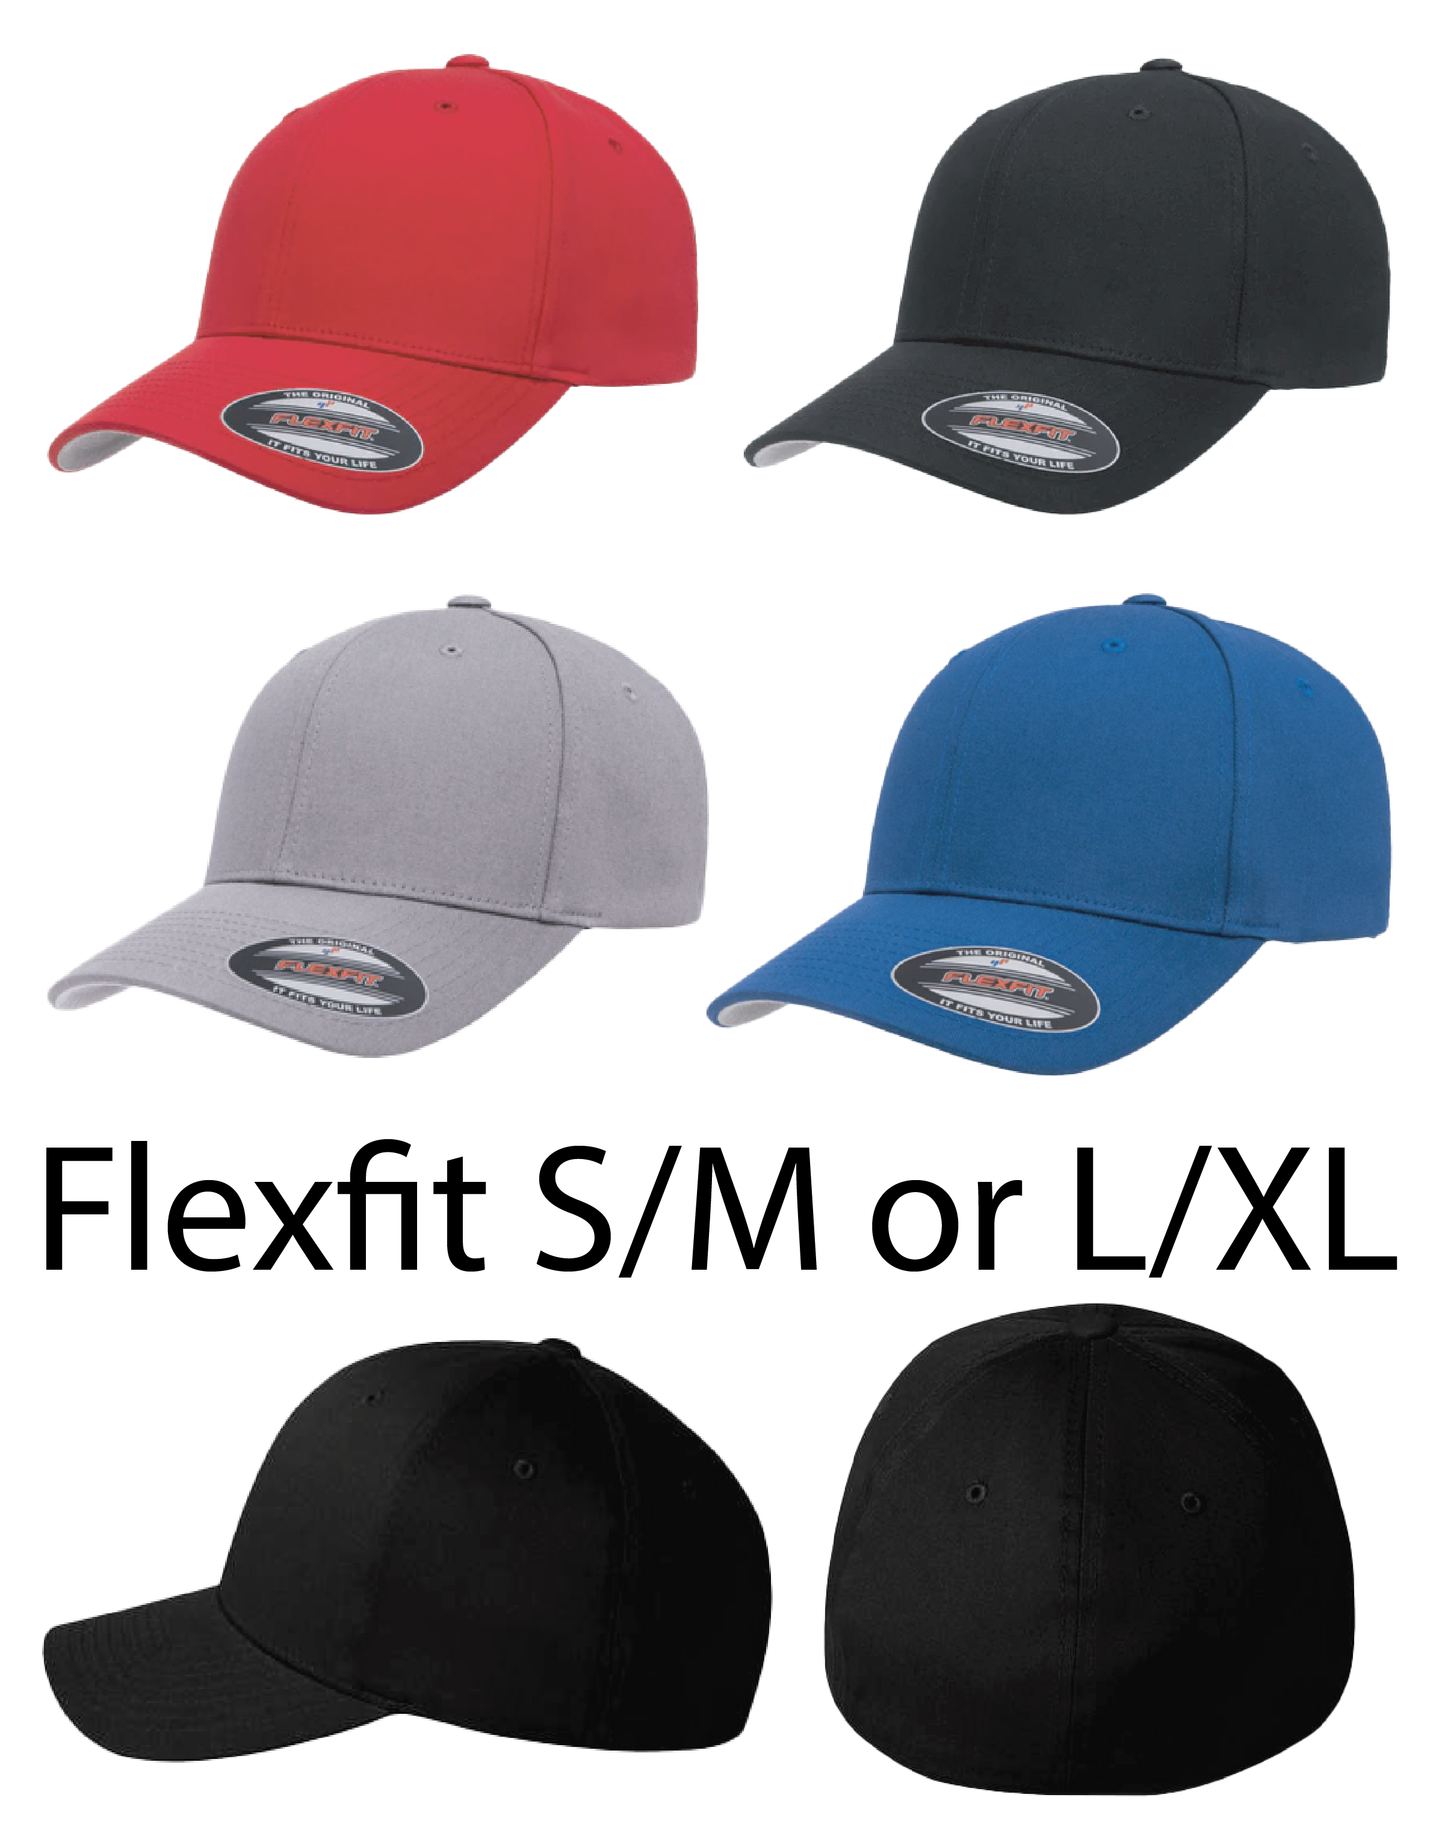 FTS Hat or Beanie - Available in Multiple Colors & Styles